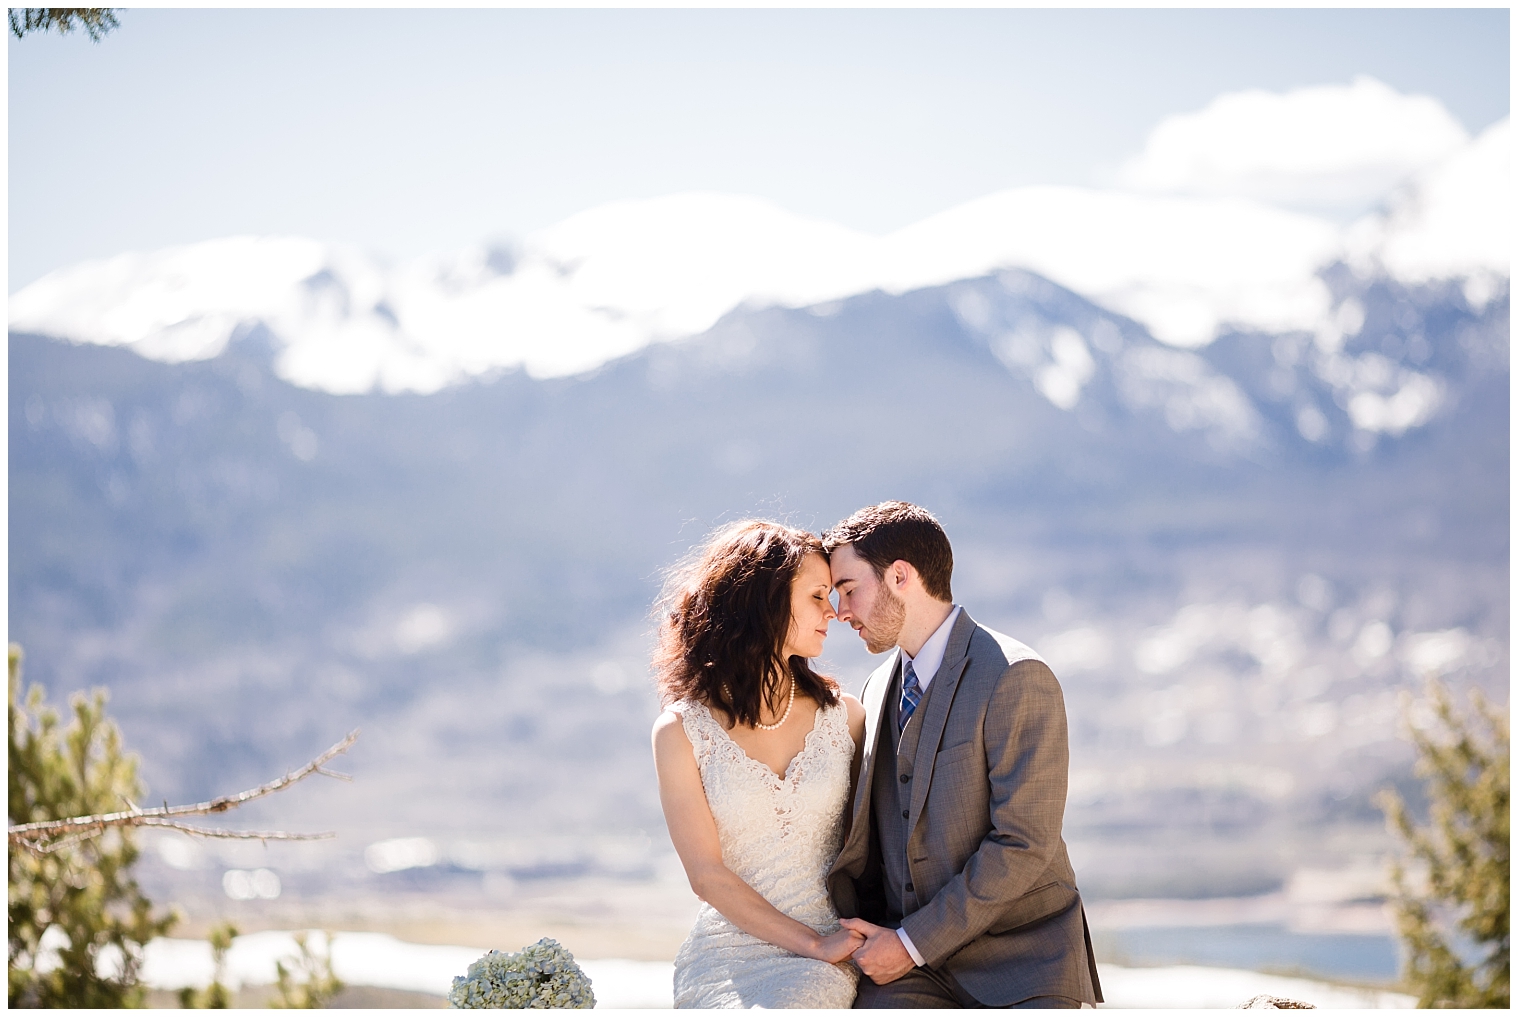 The bride and groom sit on a rock together at their Sapphire Point Overlook elopement.